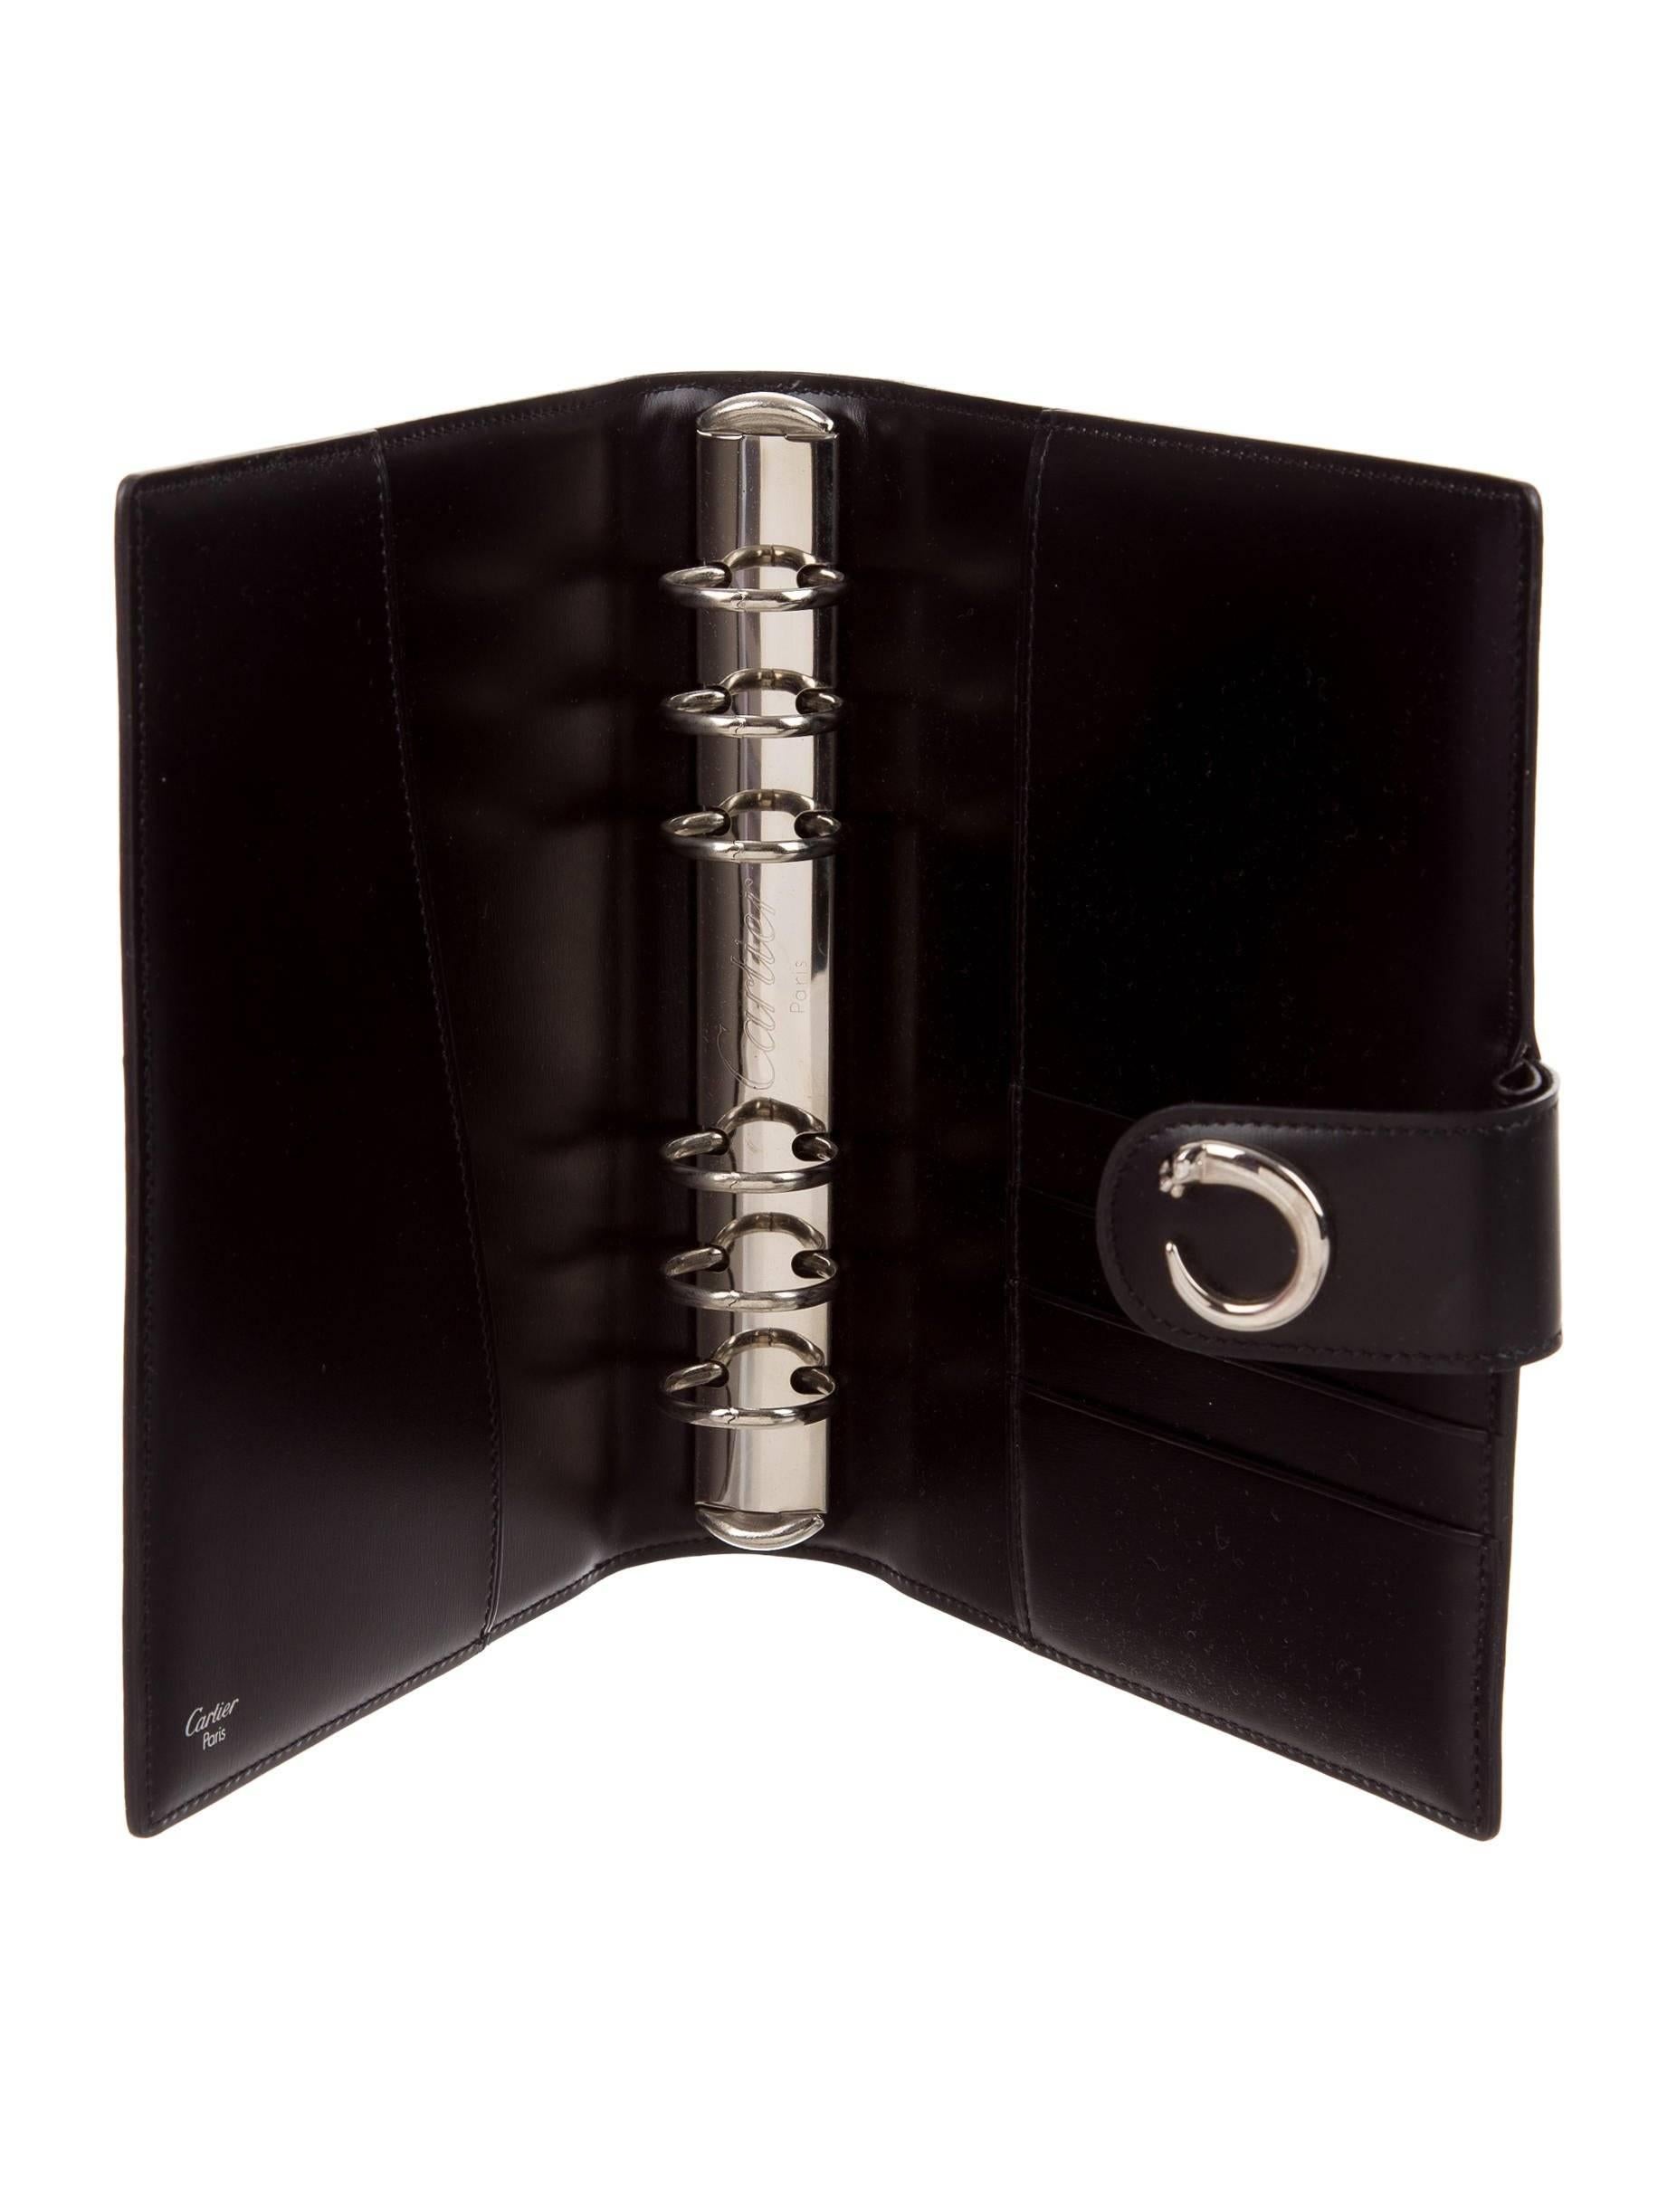 Cartier New Leather Silver Men's Women's Charm Logo Travel Agenda Planner Date Book in Box

Leather 
Silver tone hardware
Six ring binding
Snap closure
Measures 6.5" W x 7.5" L x 1.5" D 
Includes original Cartier box